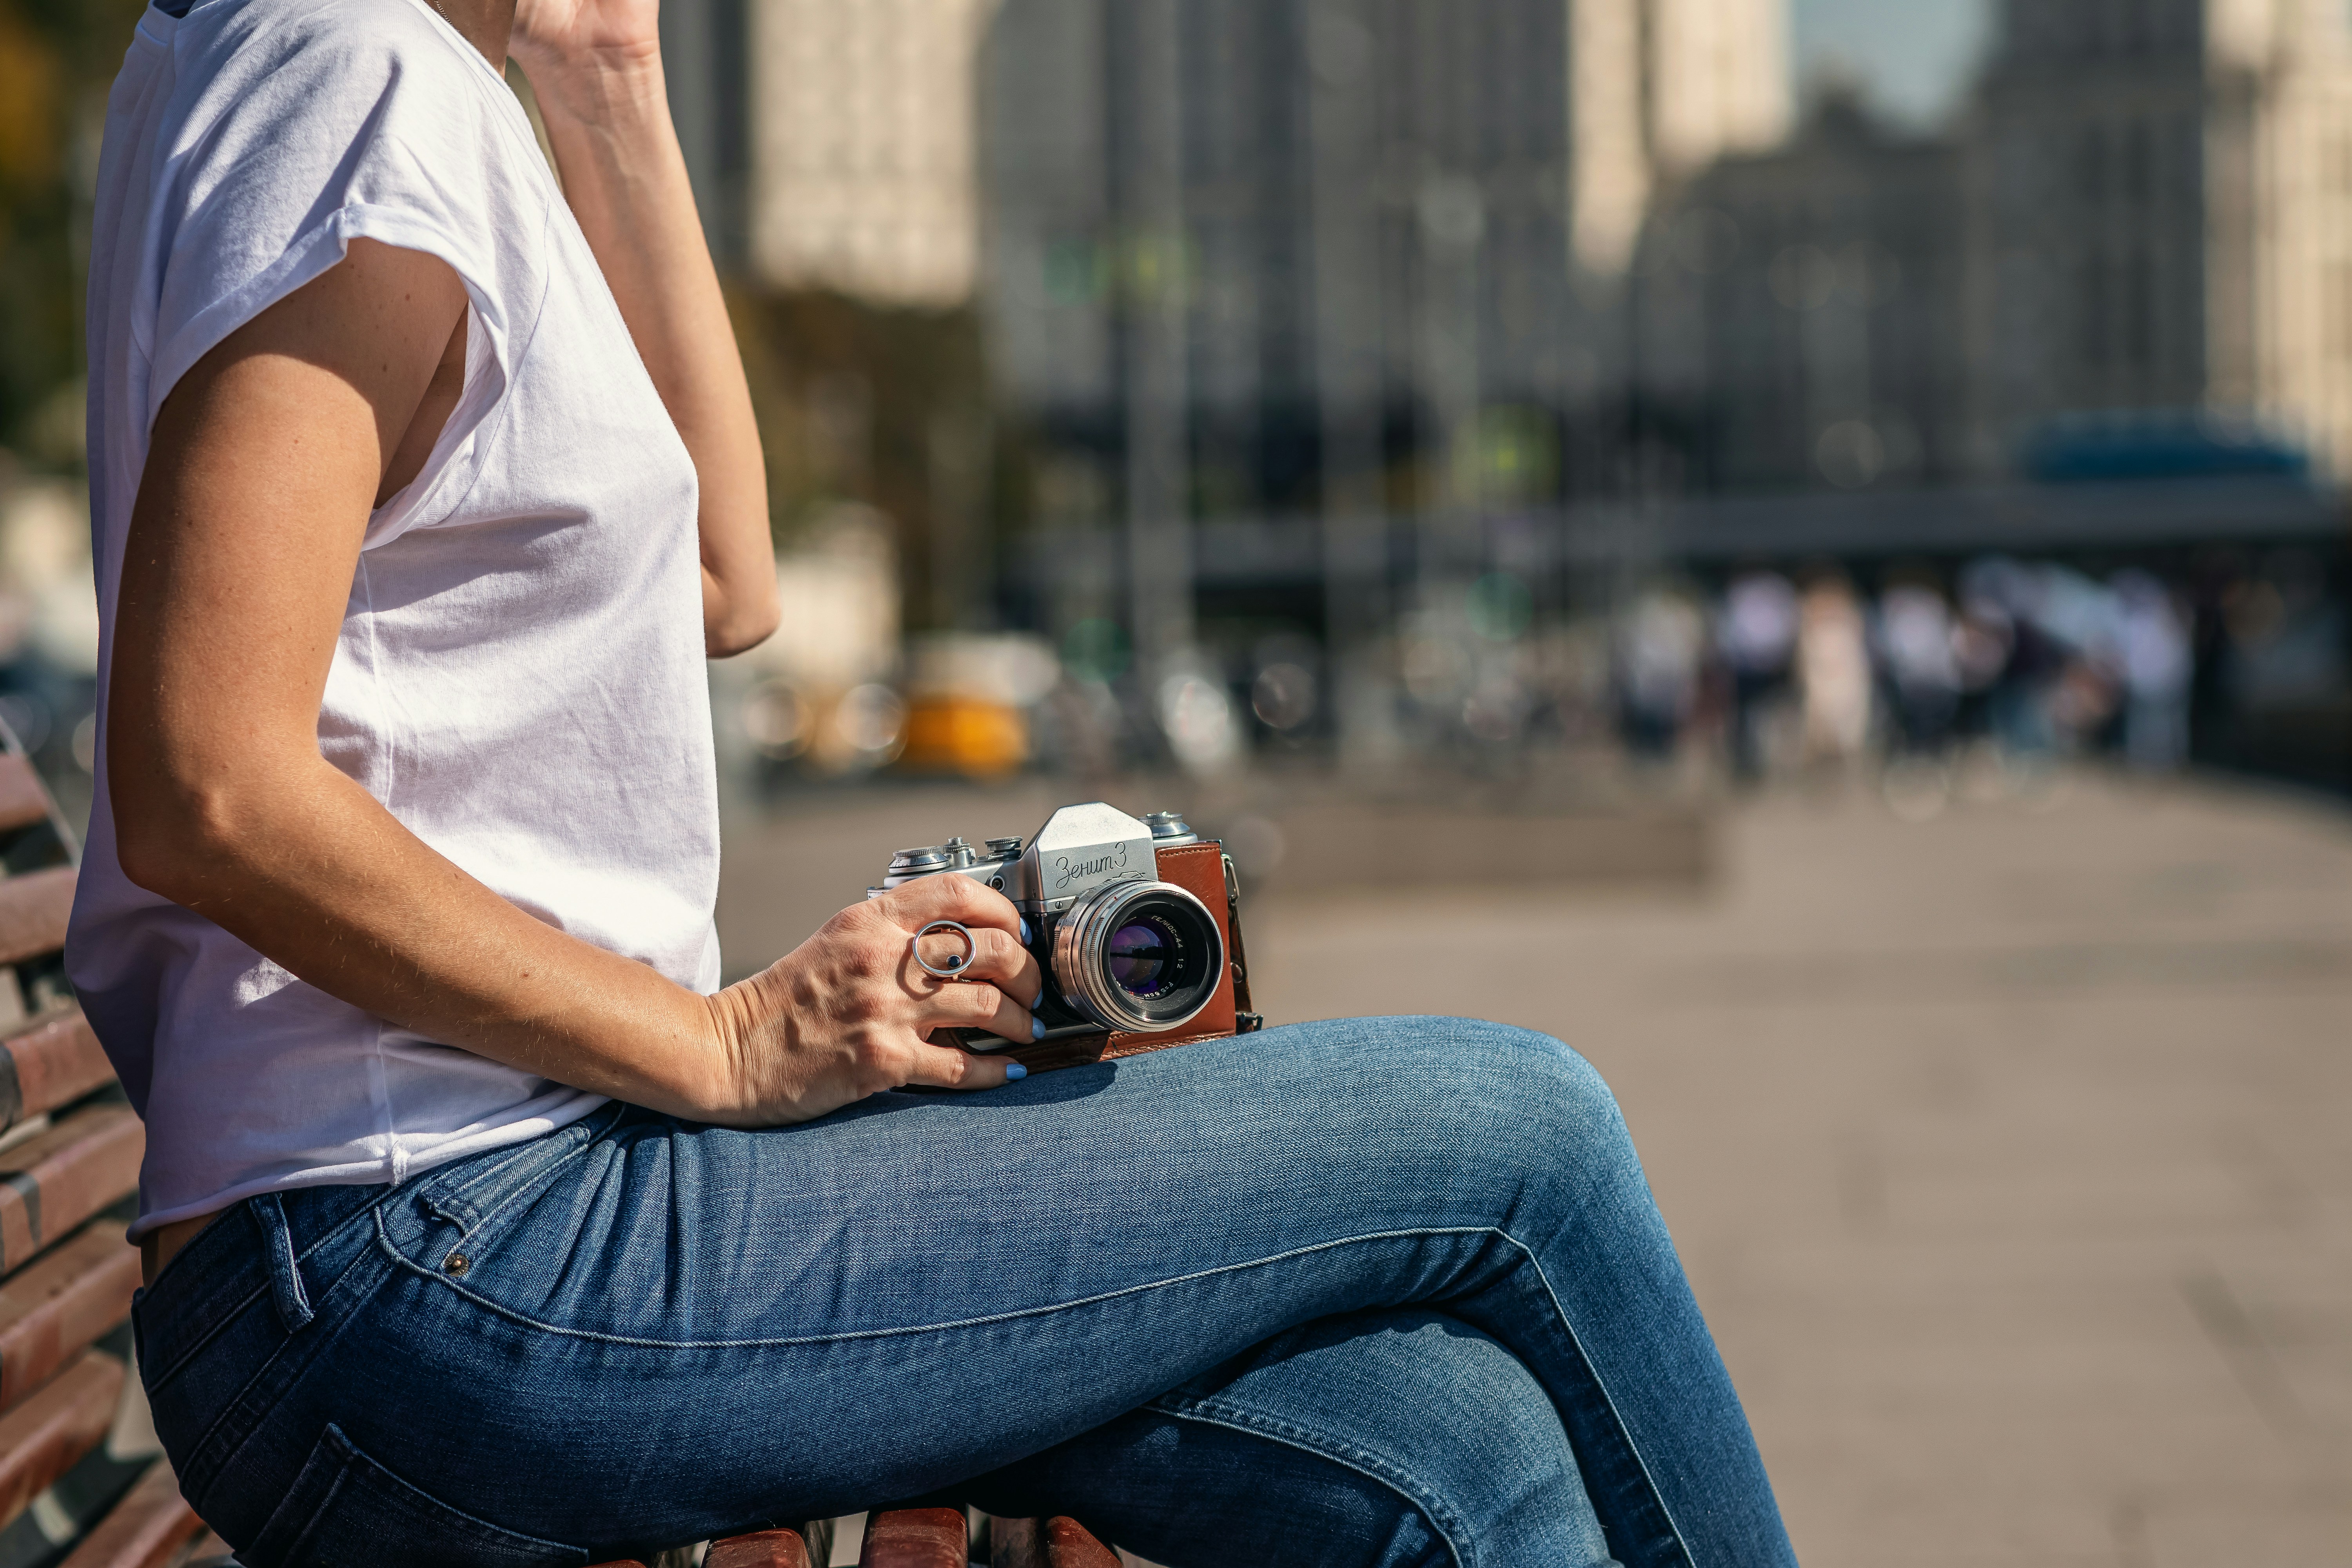 woman sitting on bench and holding camera